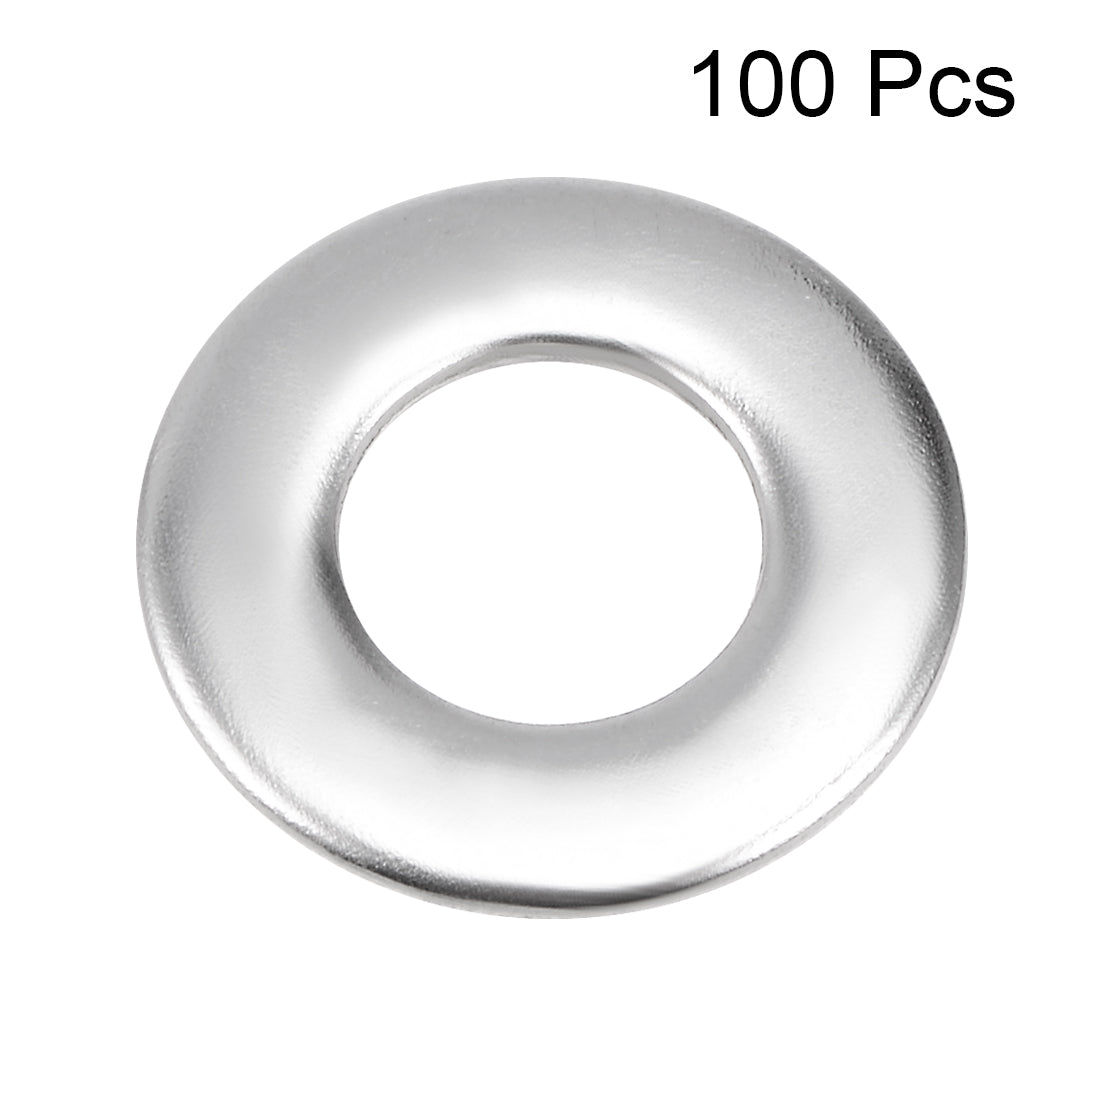 uxcell Uxcell 100Pcs 6mm x 12mm x 0.8mm 304 Stainless Steel Flat Washer for Screw Bolt